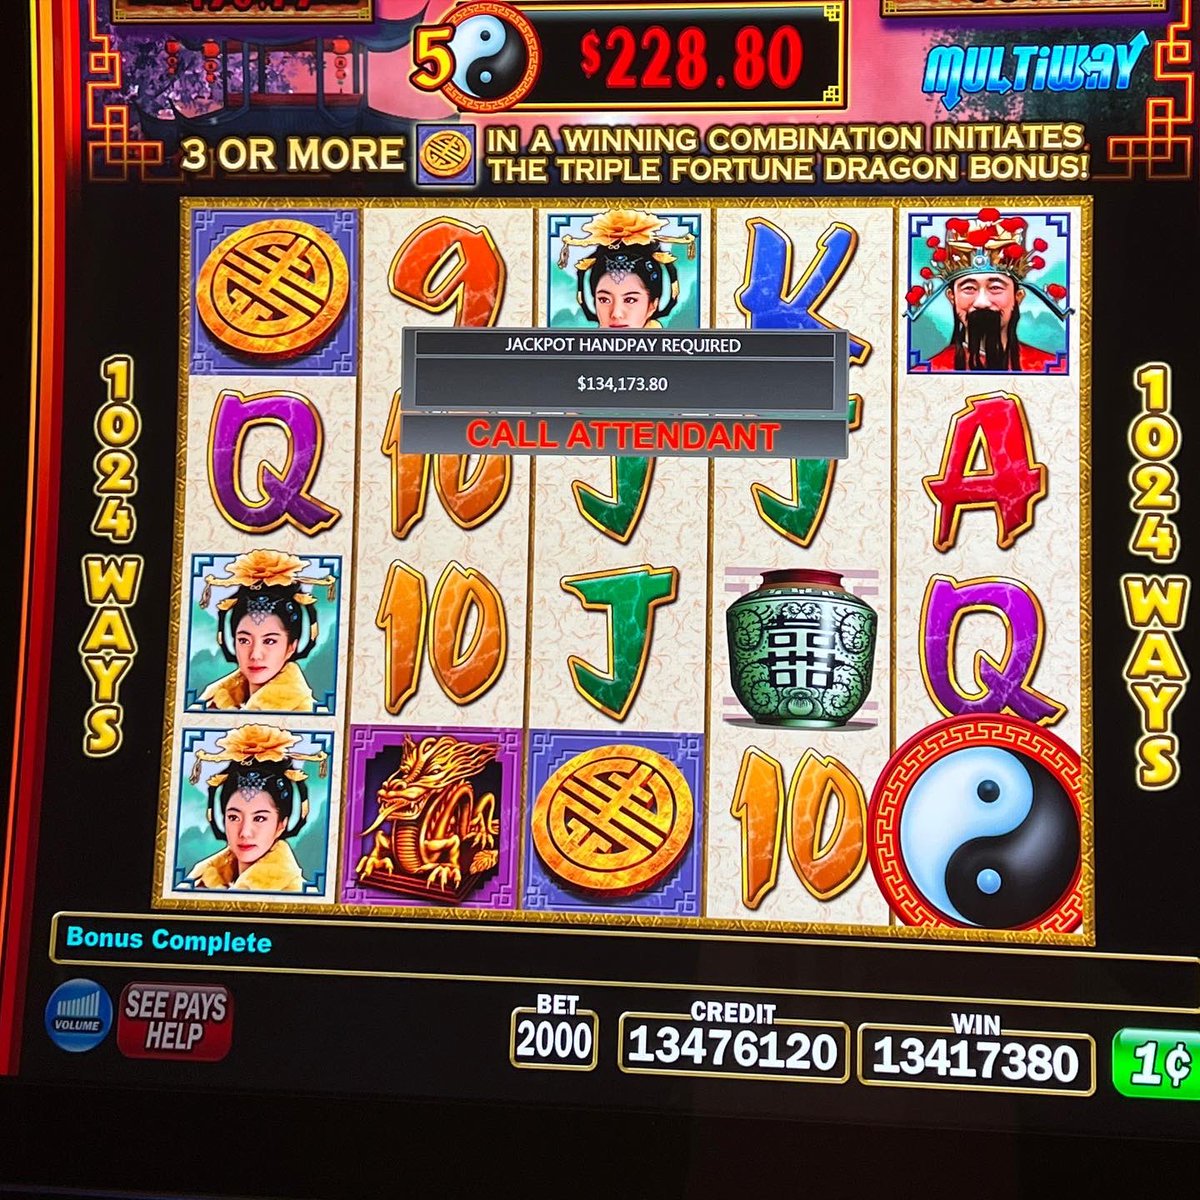 Triple Fortune Dragon $134,173.80 JACKPOT! Now that’s a big win!! &#127920;&#128293;